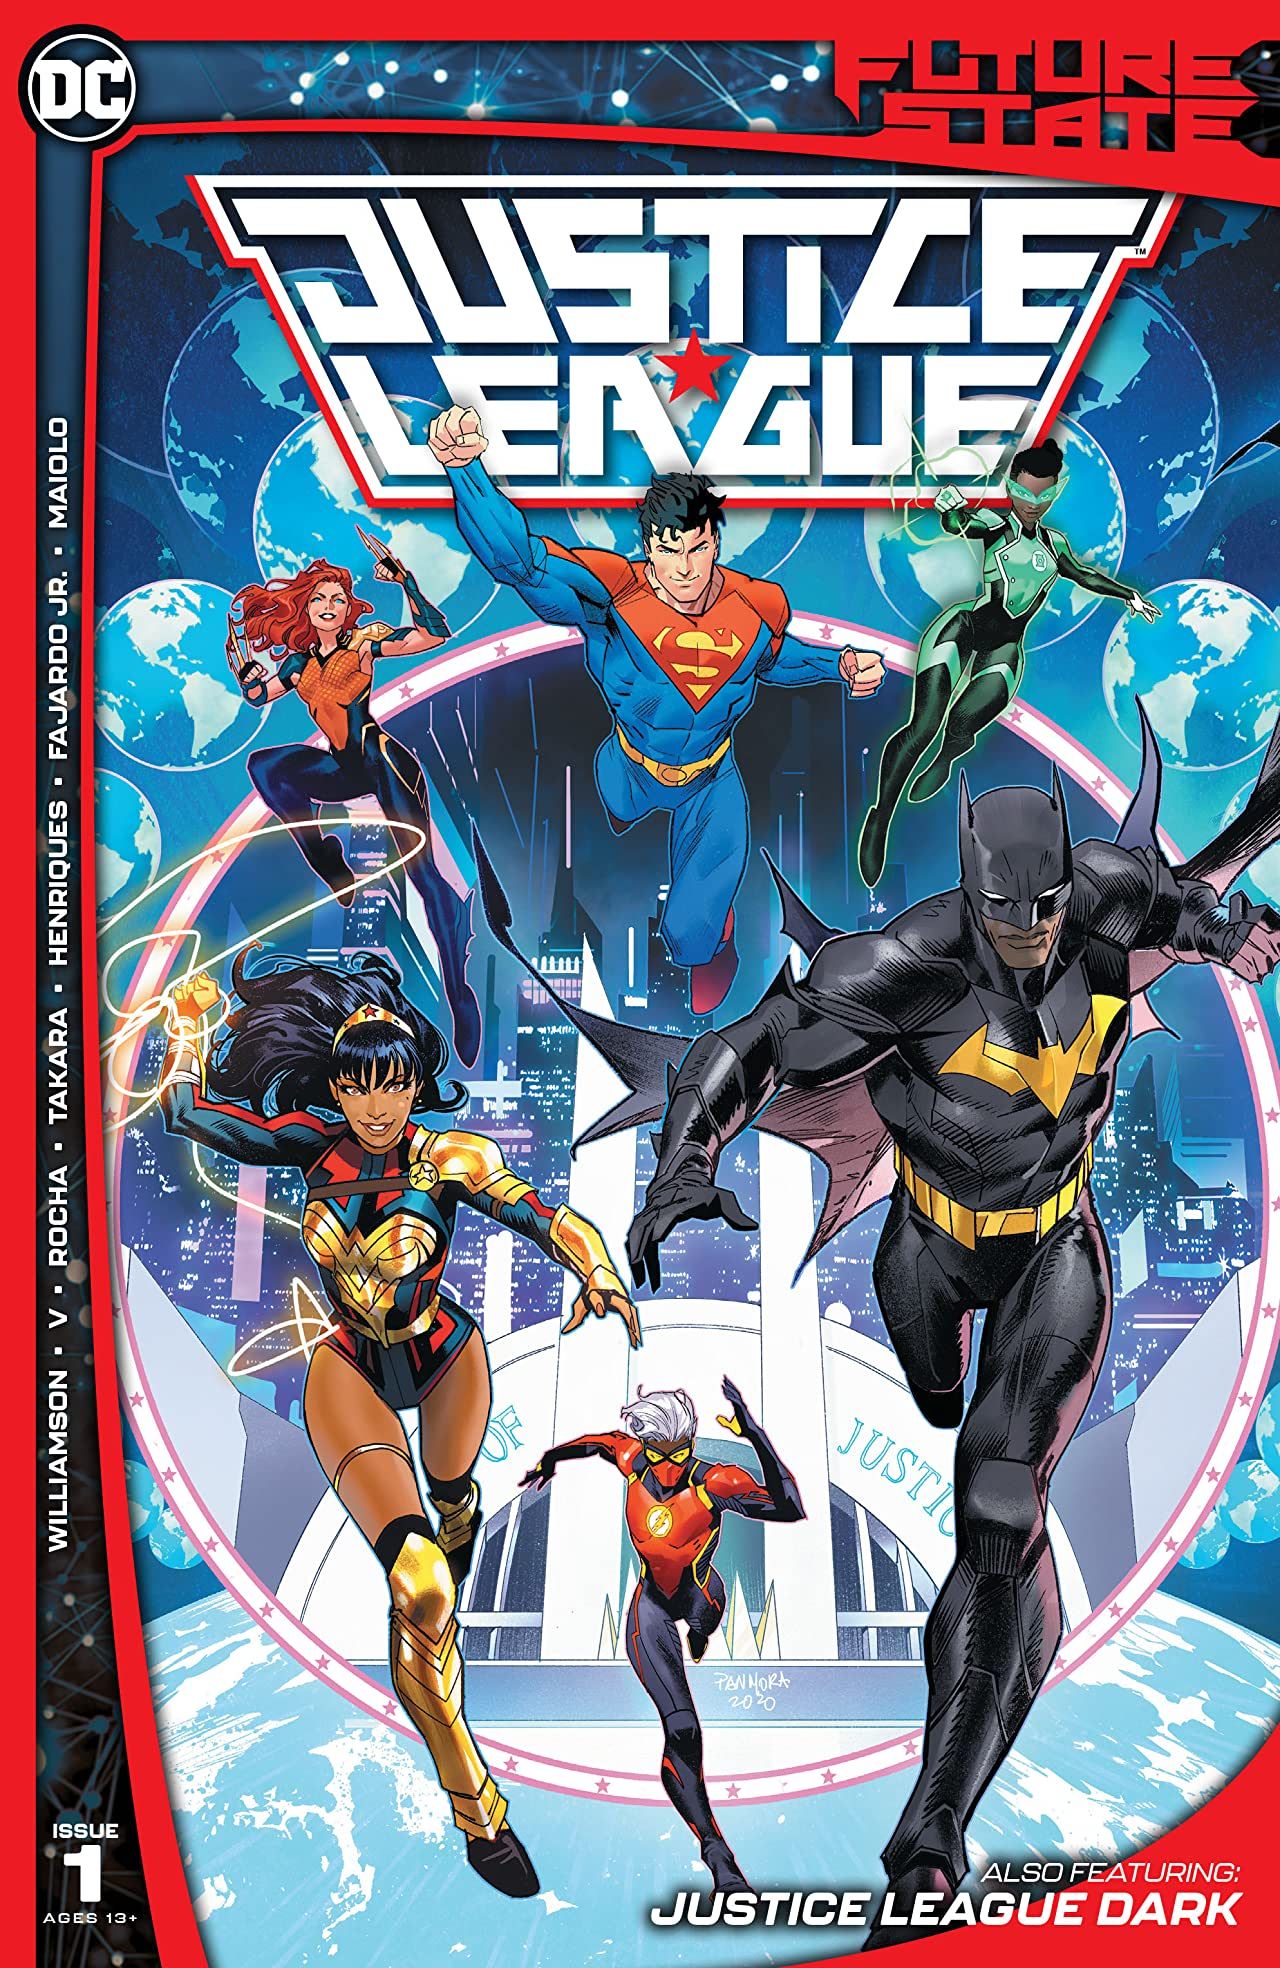 REVIEW: Future State: Justice League #1 Is an Exciting, Bold Shift